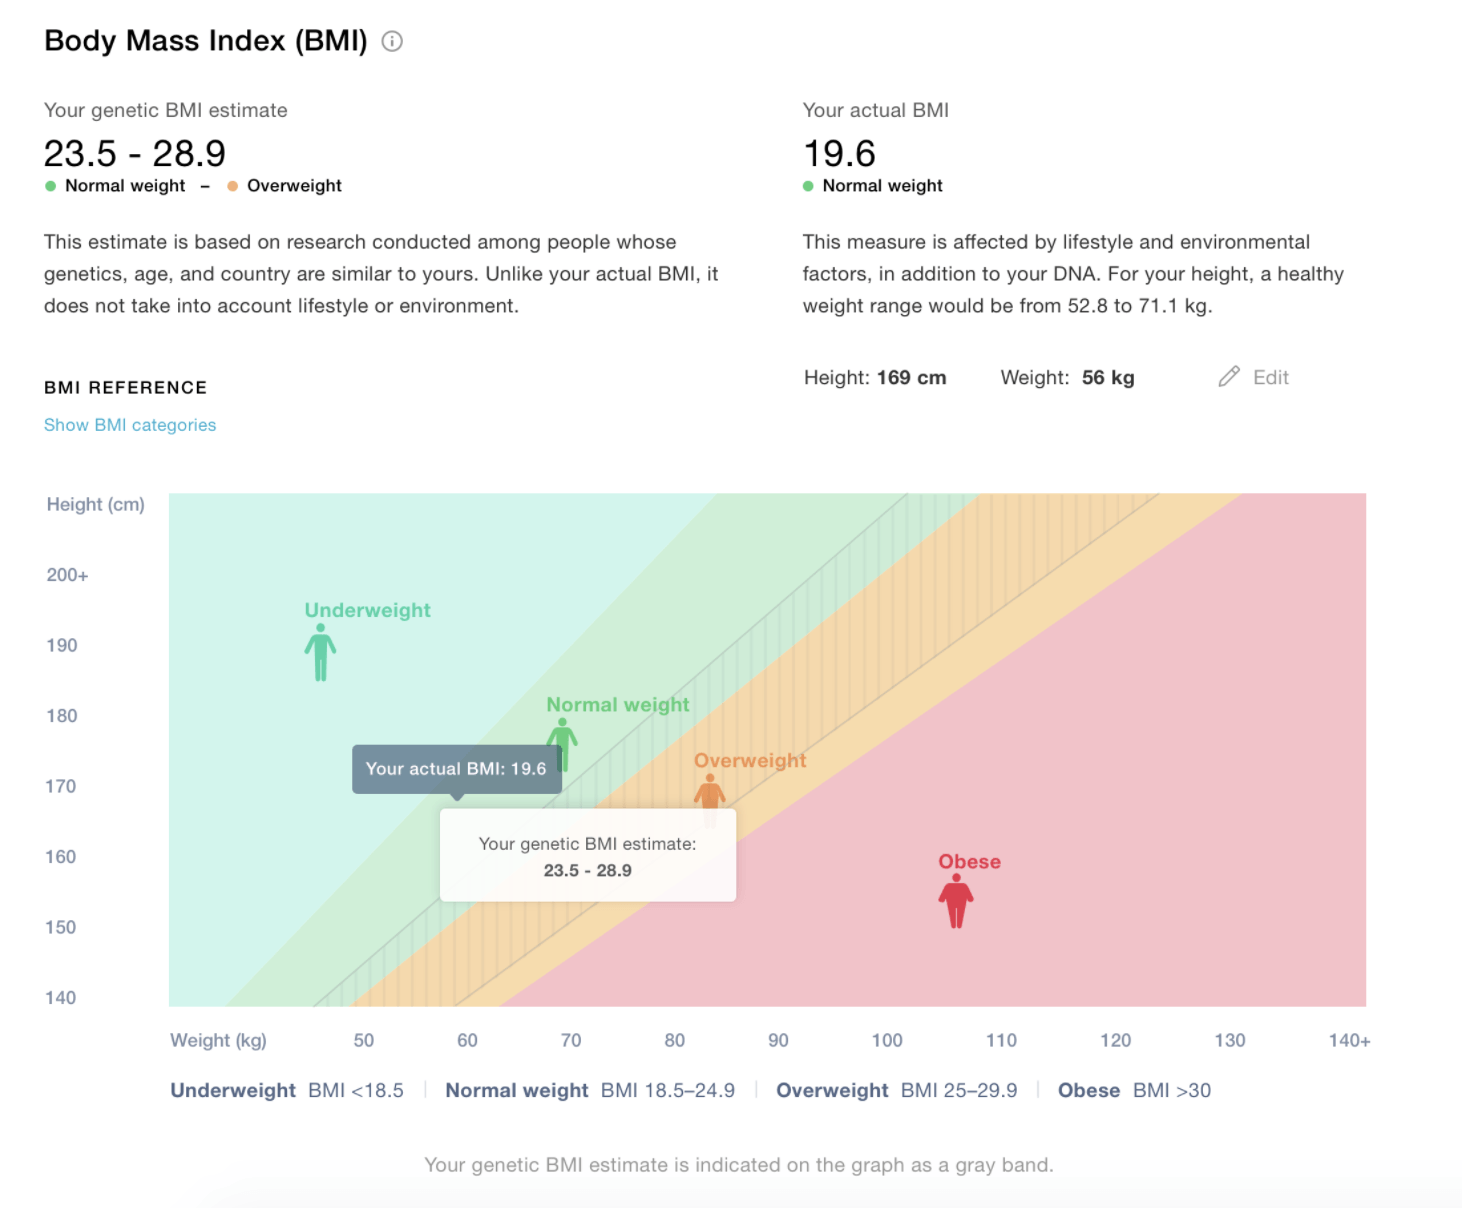 New: Body Mass Index advanced graph showing your genetic BMI estimate with your actual BMI